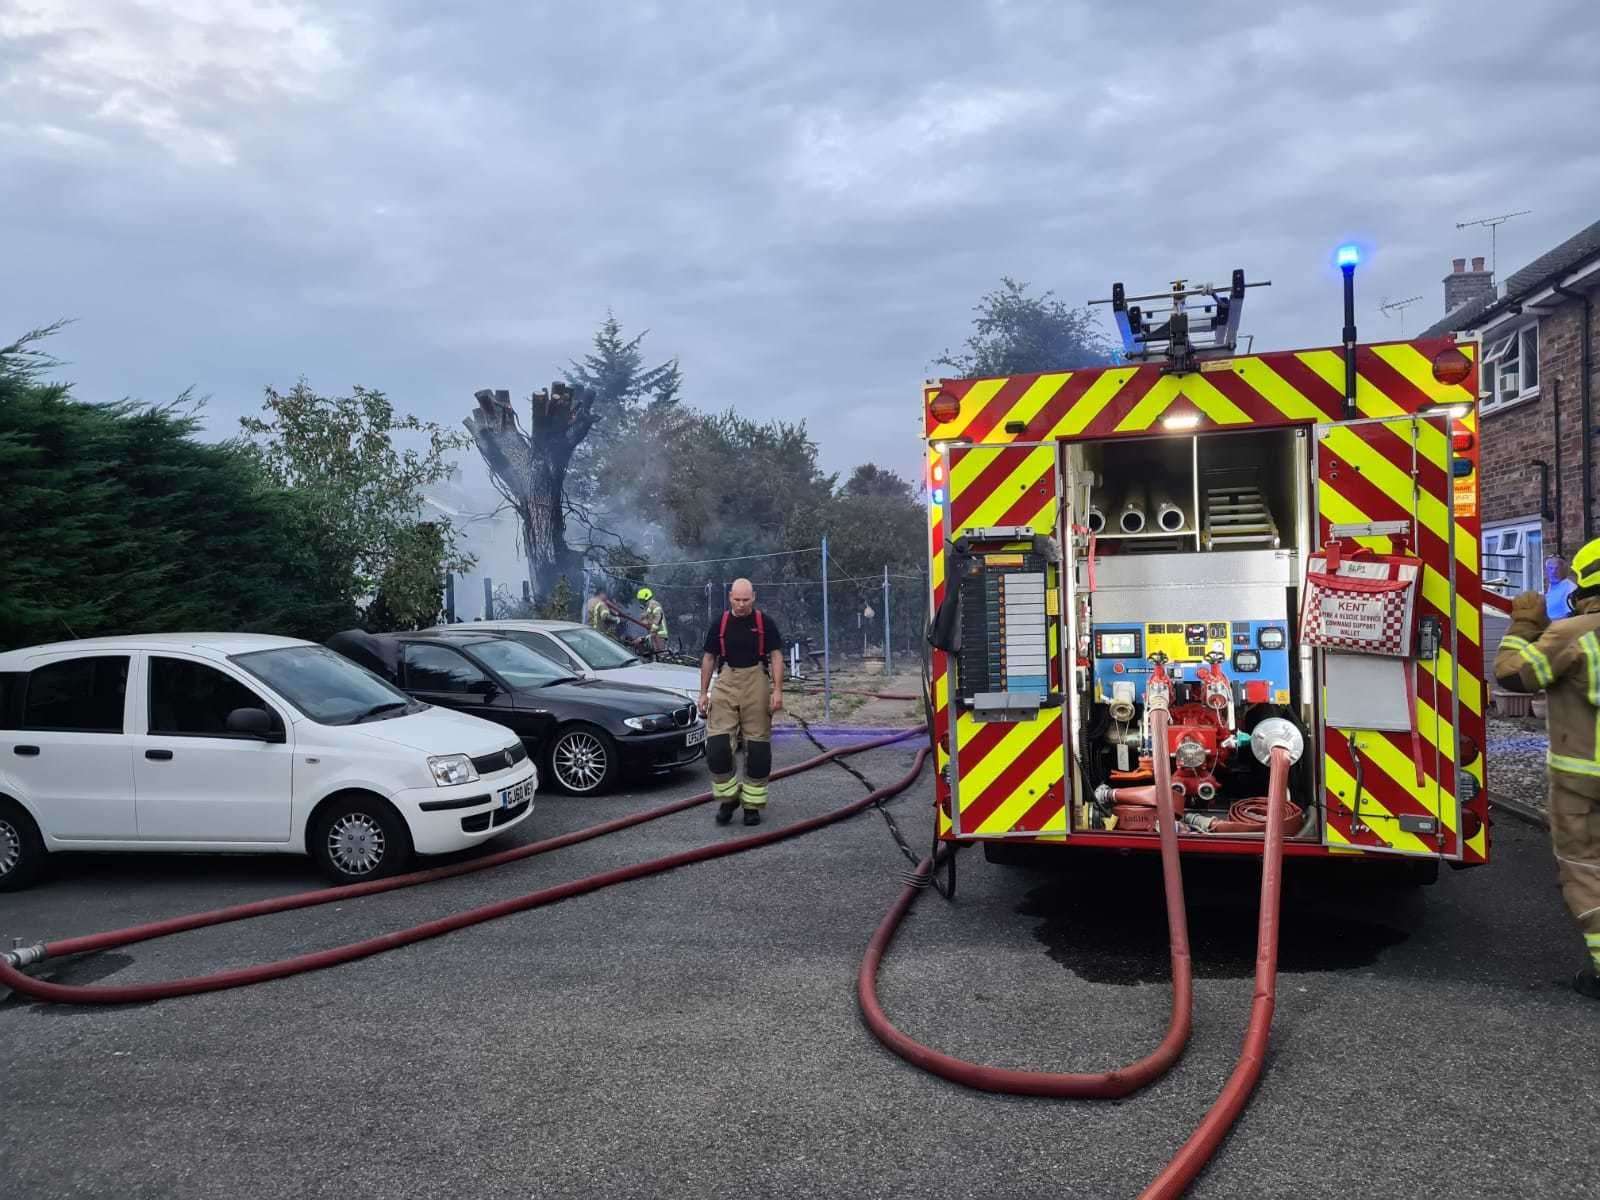 A strong number of firefighters were called out to the incident